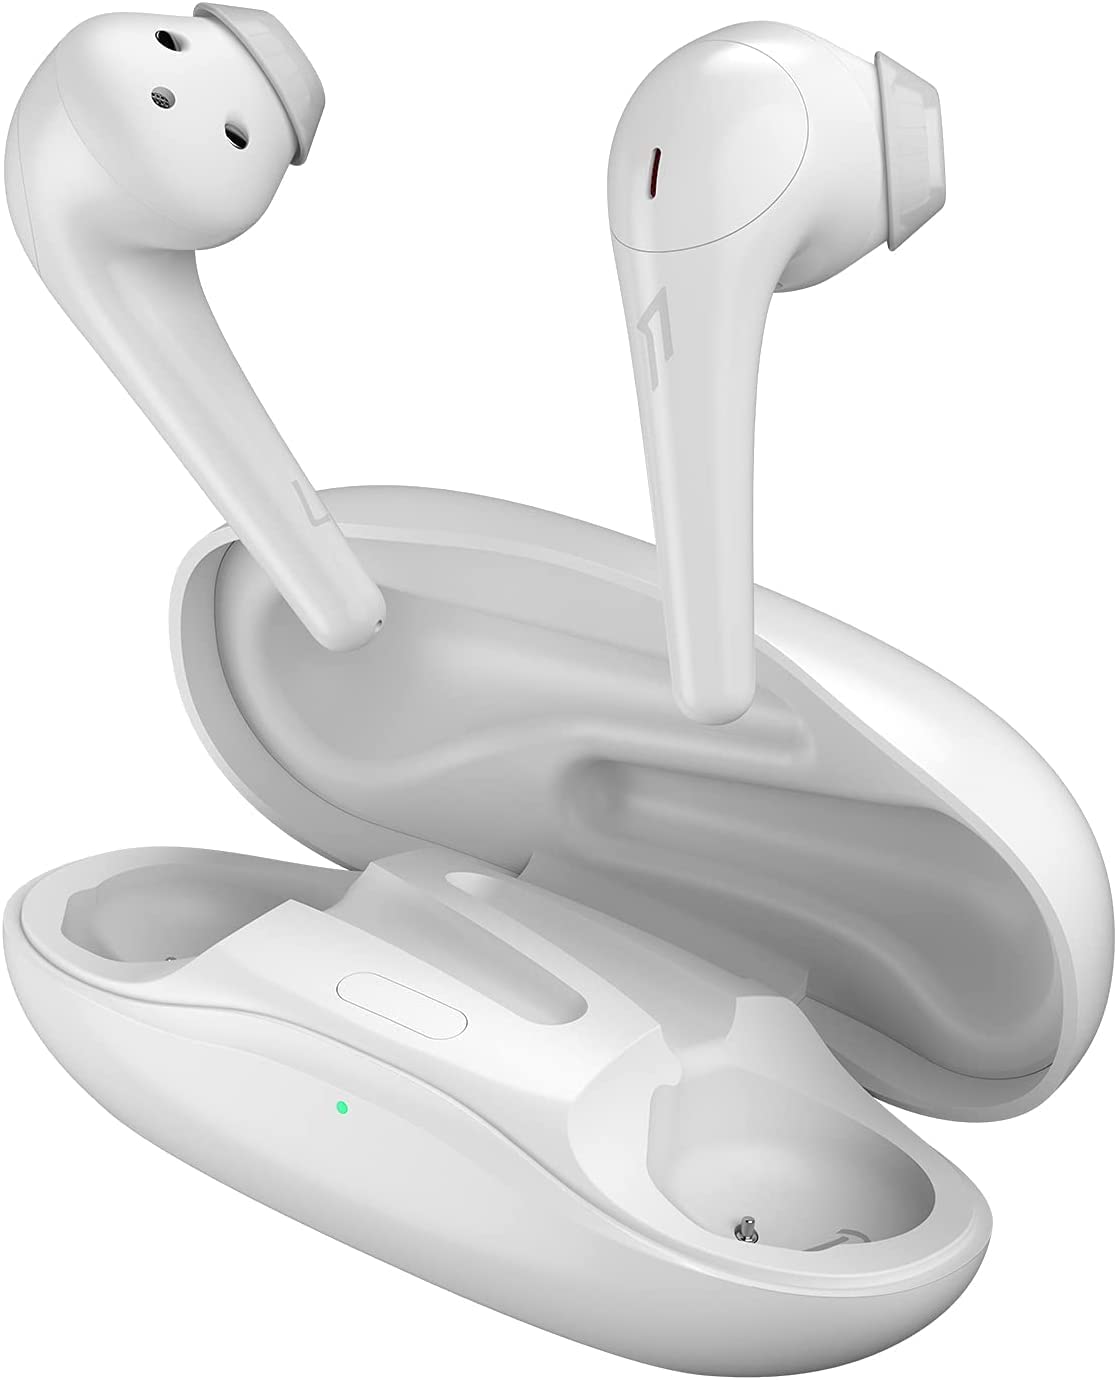 1MORE Comfobuds 2 in-Ear Earphones with 4 Mic for $11.99